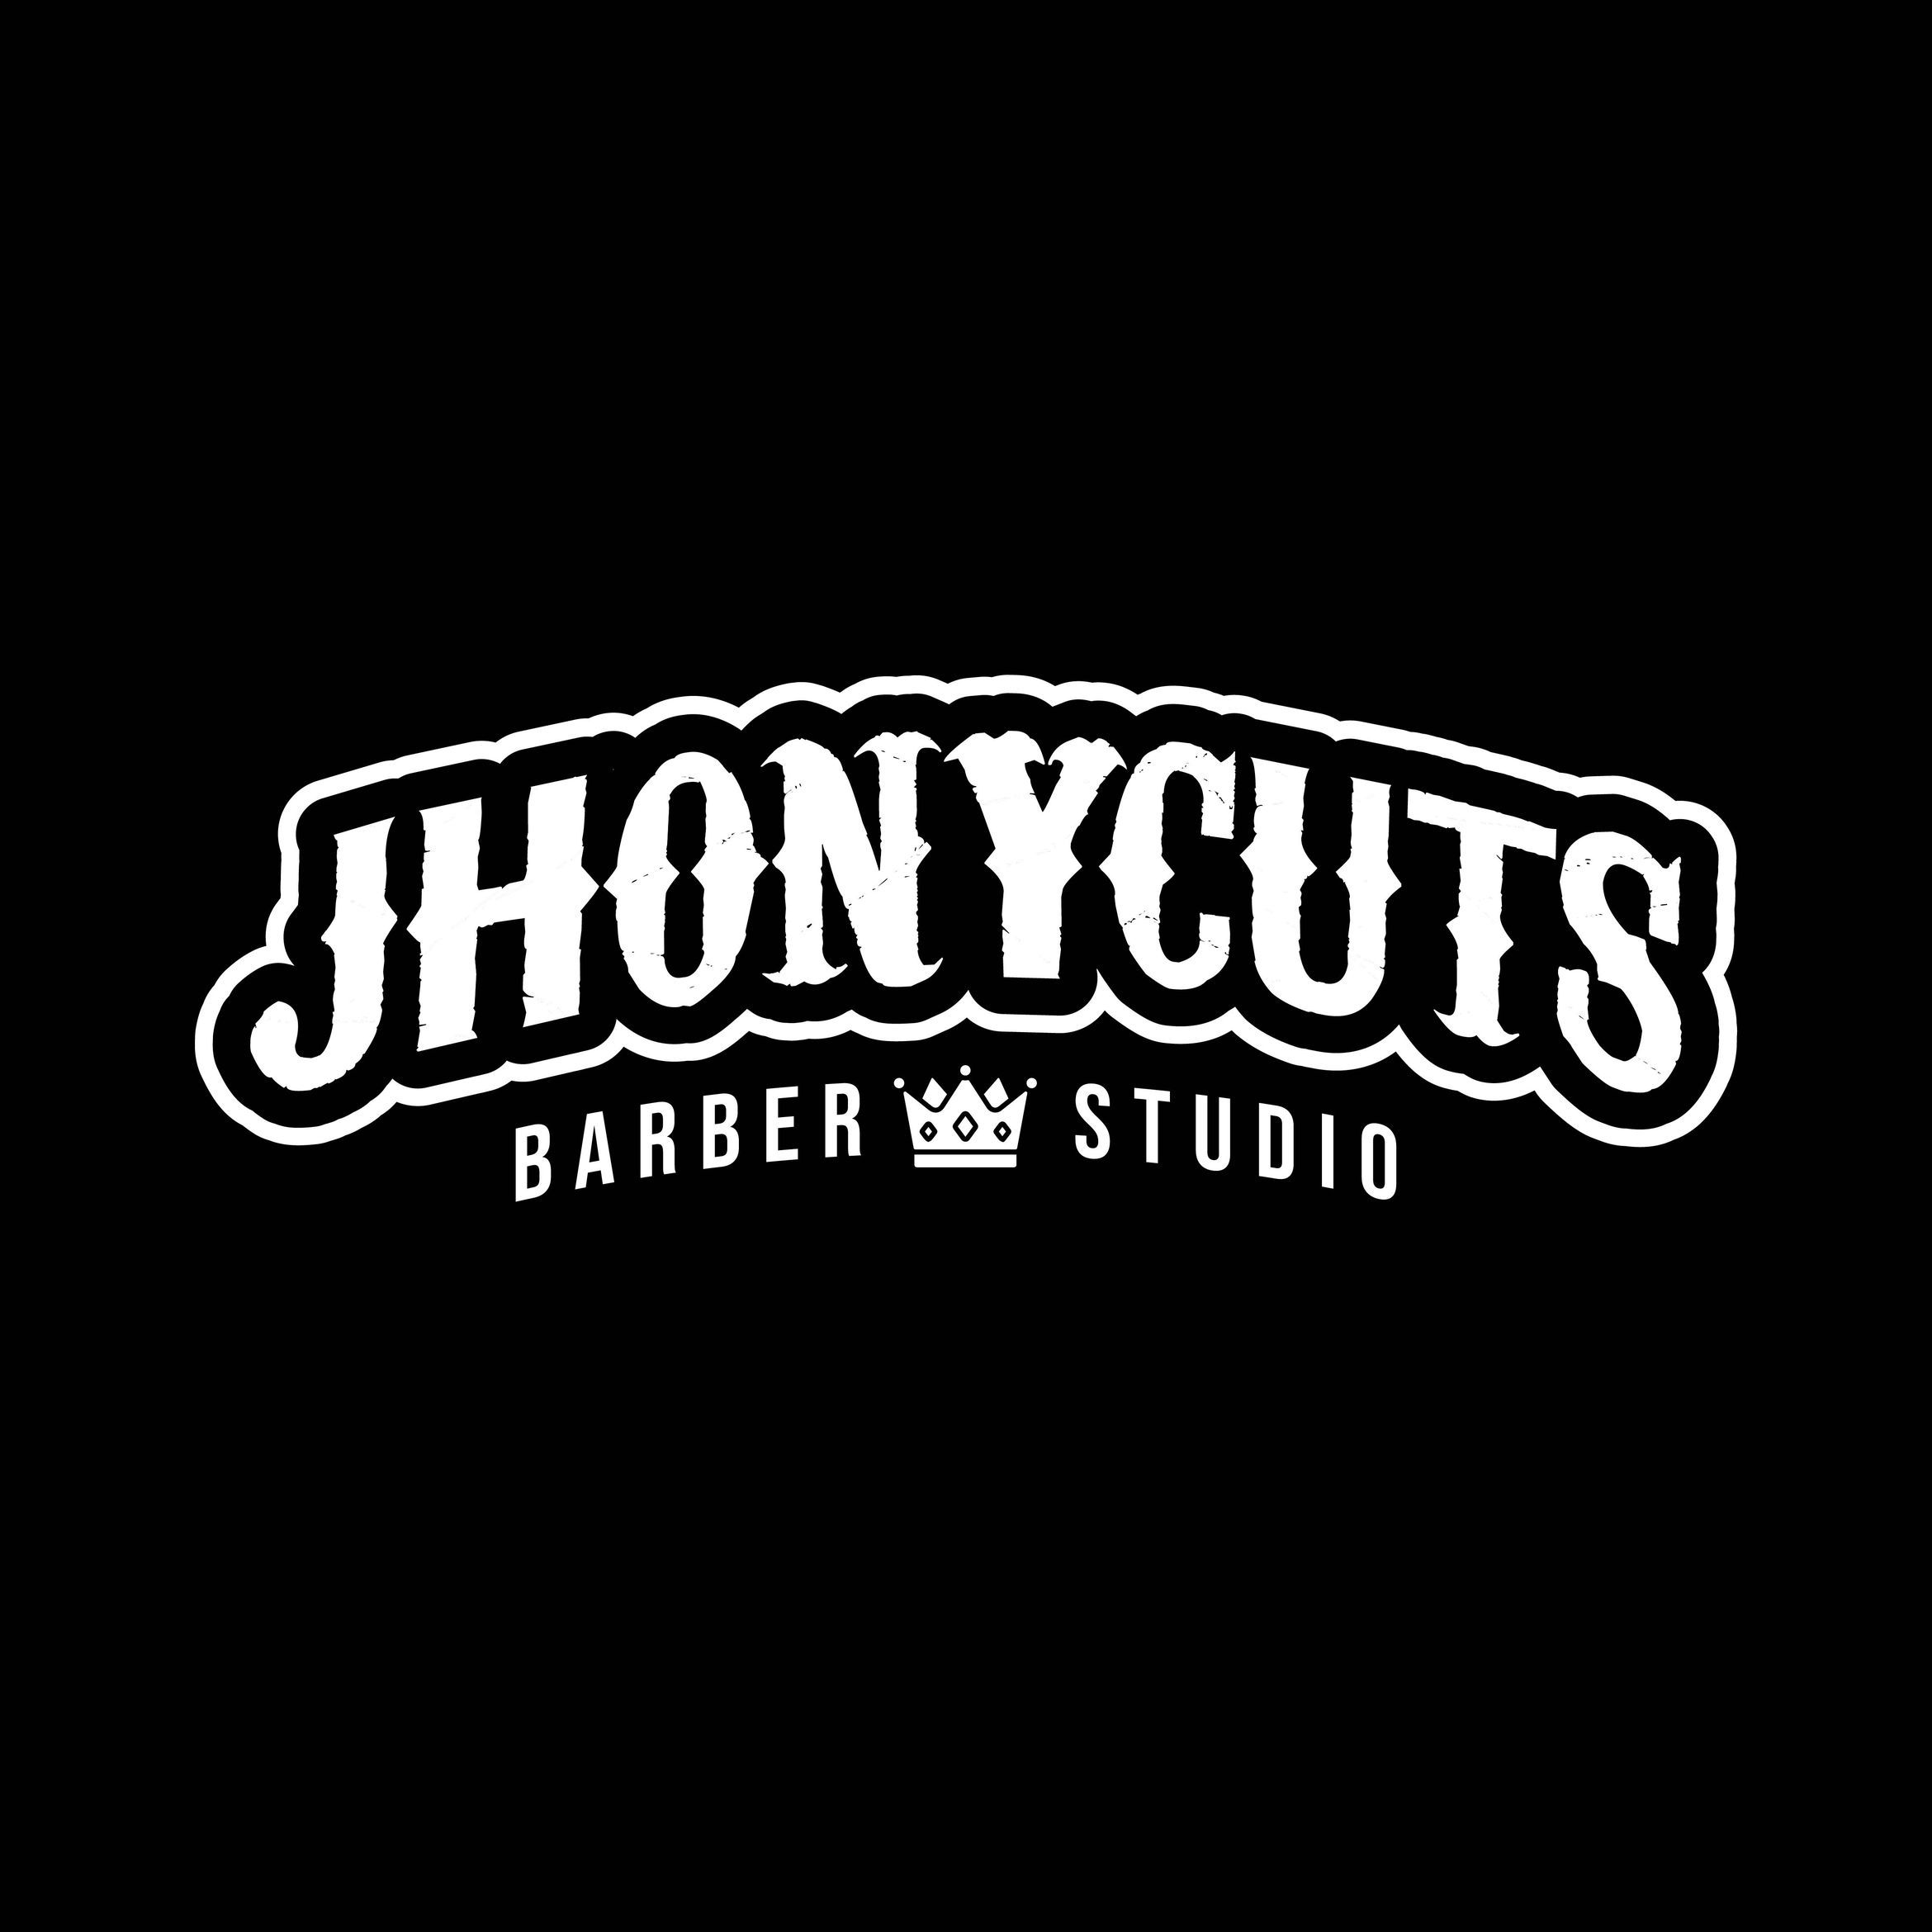 Jhonycuts, 4434 Hoffner ave, Suite a4, Orlando, 32812